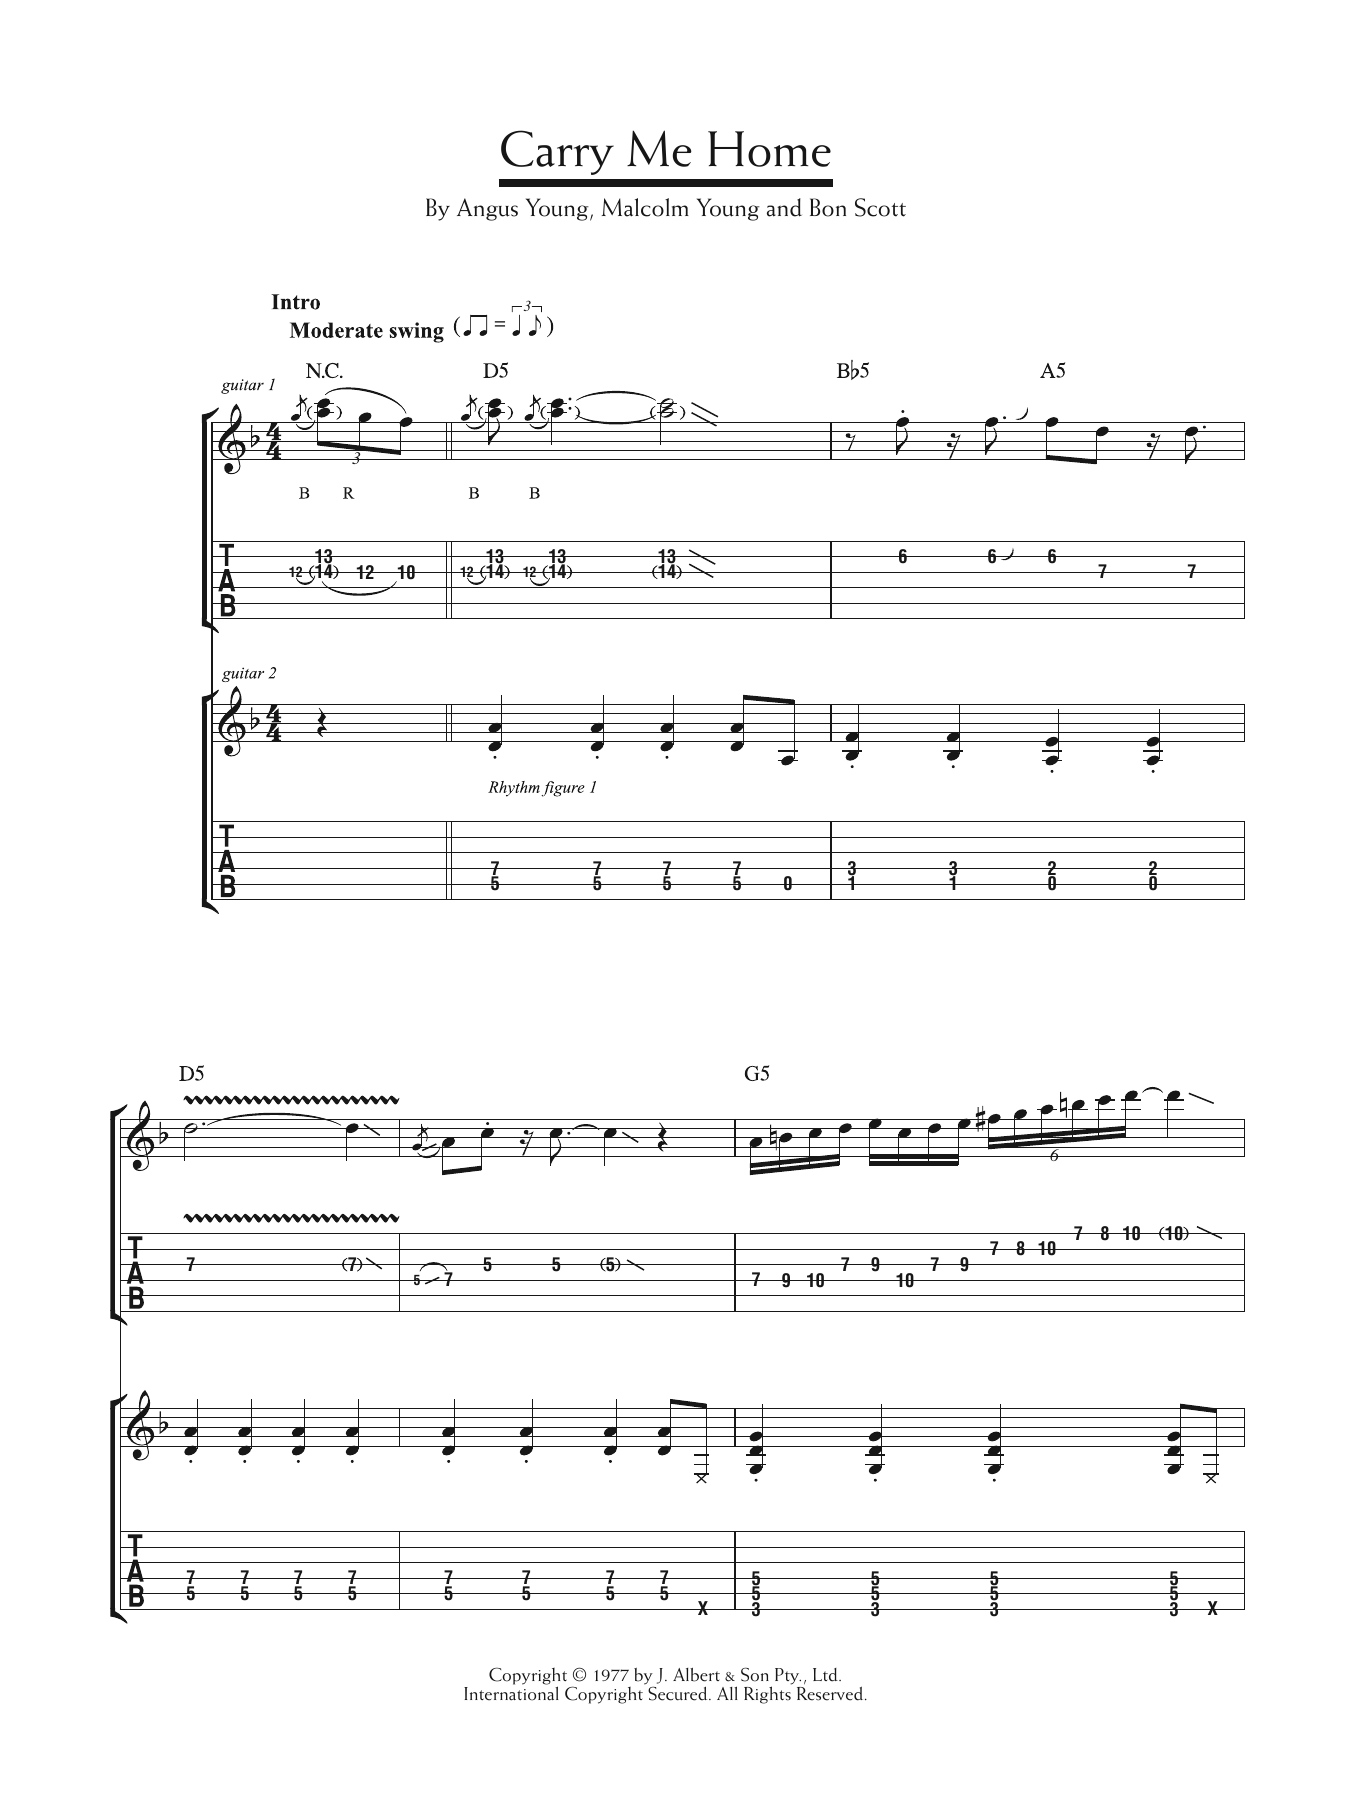 Download AC/DC Carry Me Home Sheet Music